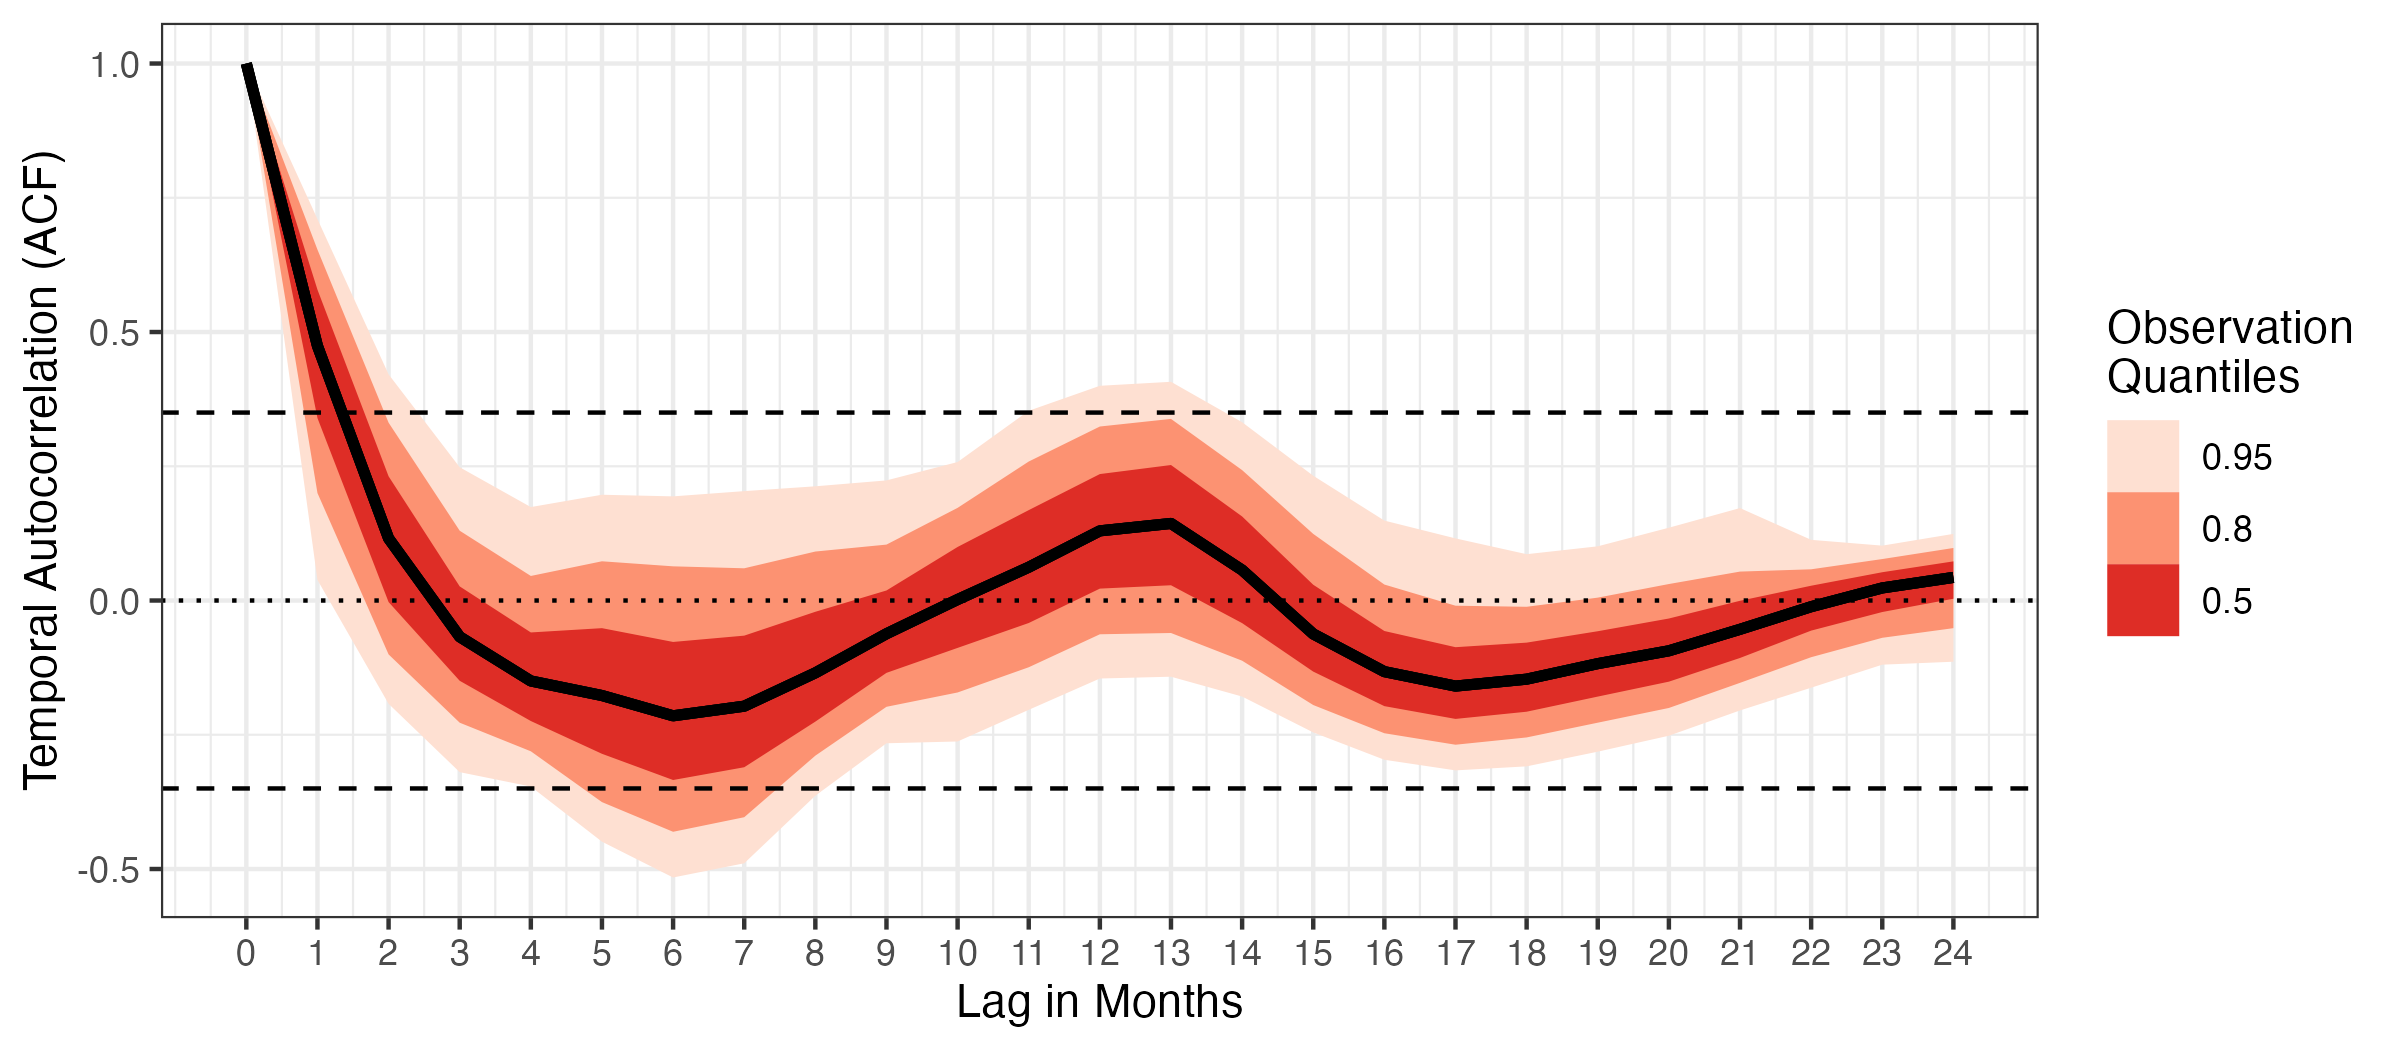 a plot of the average county level autocorrelation over time;  e.g. how correlated monthly observations were with observations from future months